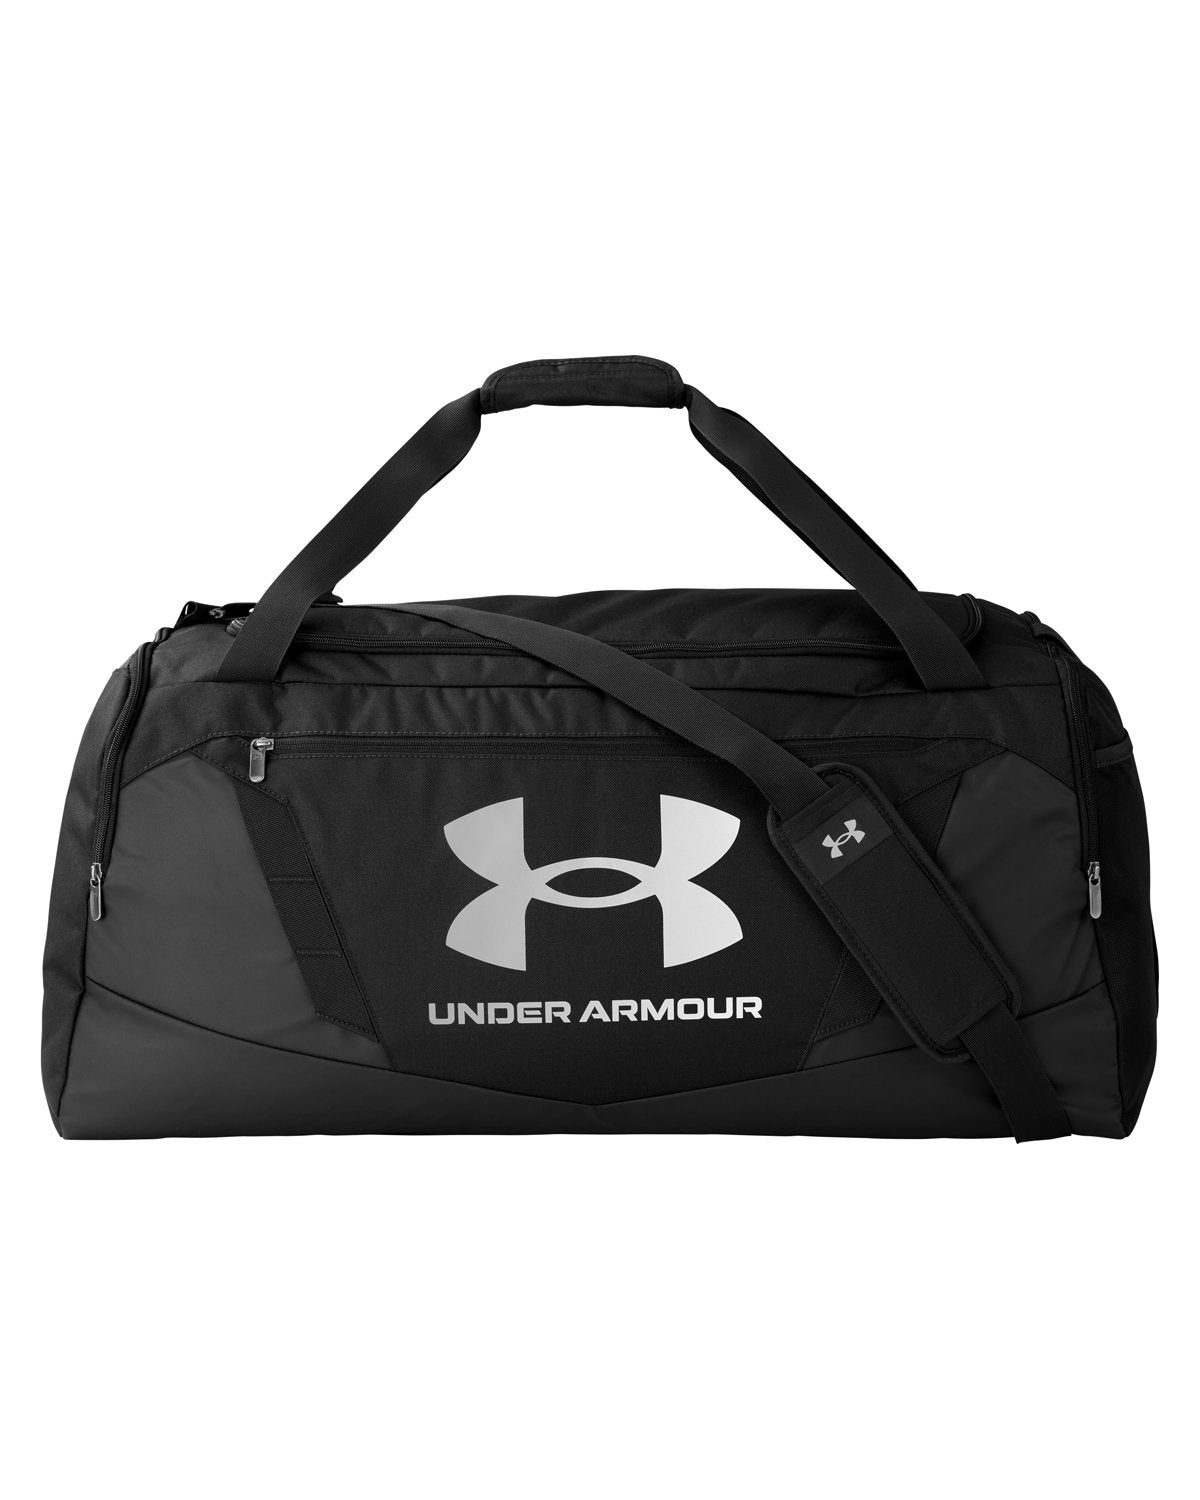 Under Armour Large Duffle (1369224)